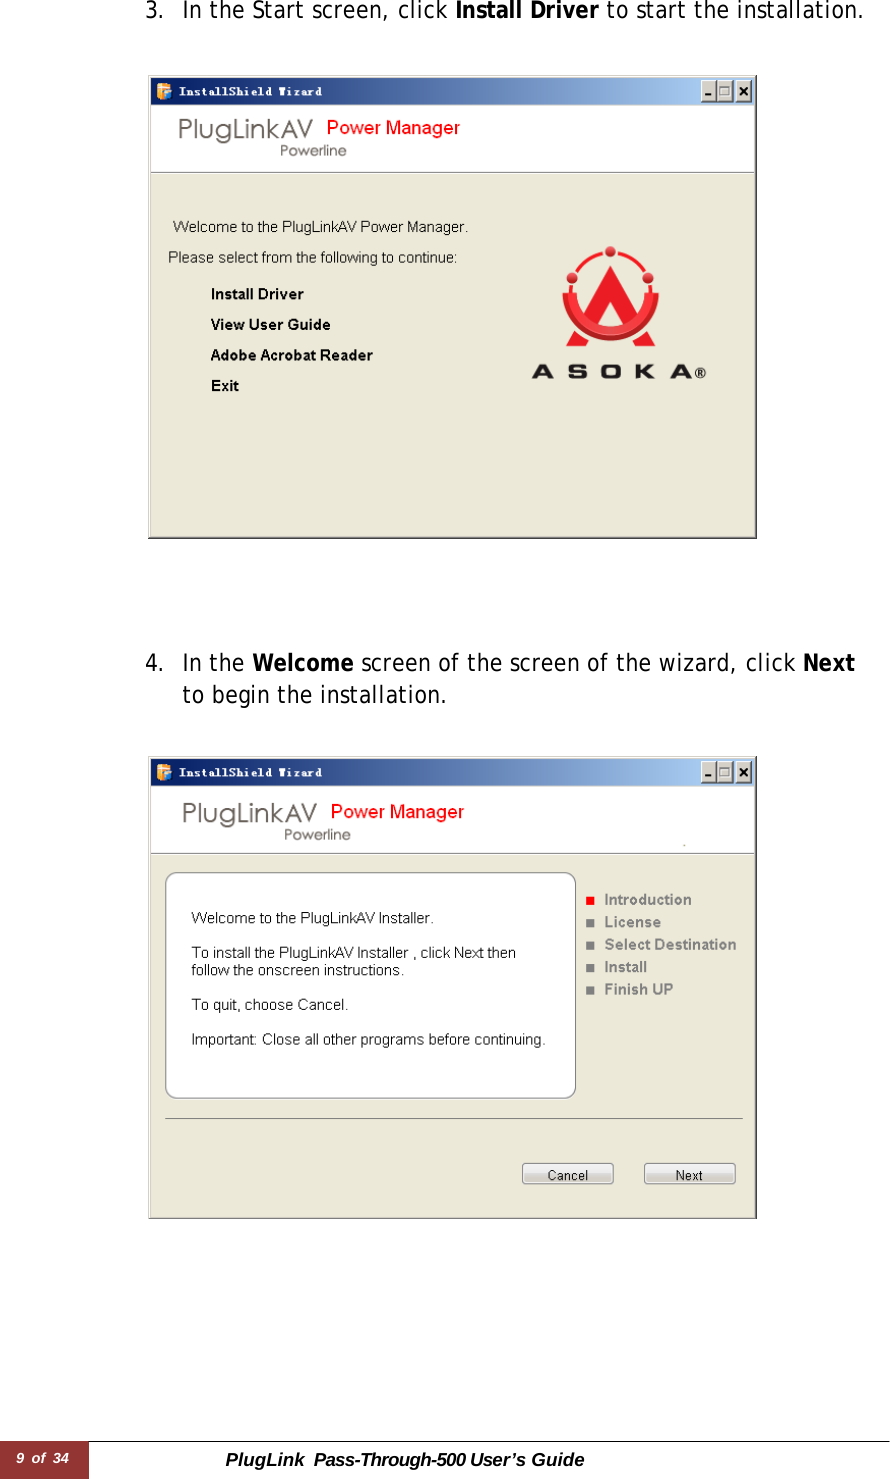 9 of 34 PlugLink  Pass-Through-500 User’s Guide  3. In the Start screen, click Install Driver to start the installation.         4. In the Welcome screen of the screen of the wizard, click Next to begin the installation.    